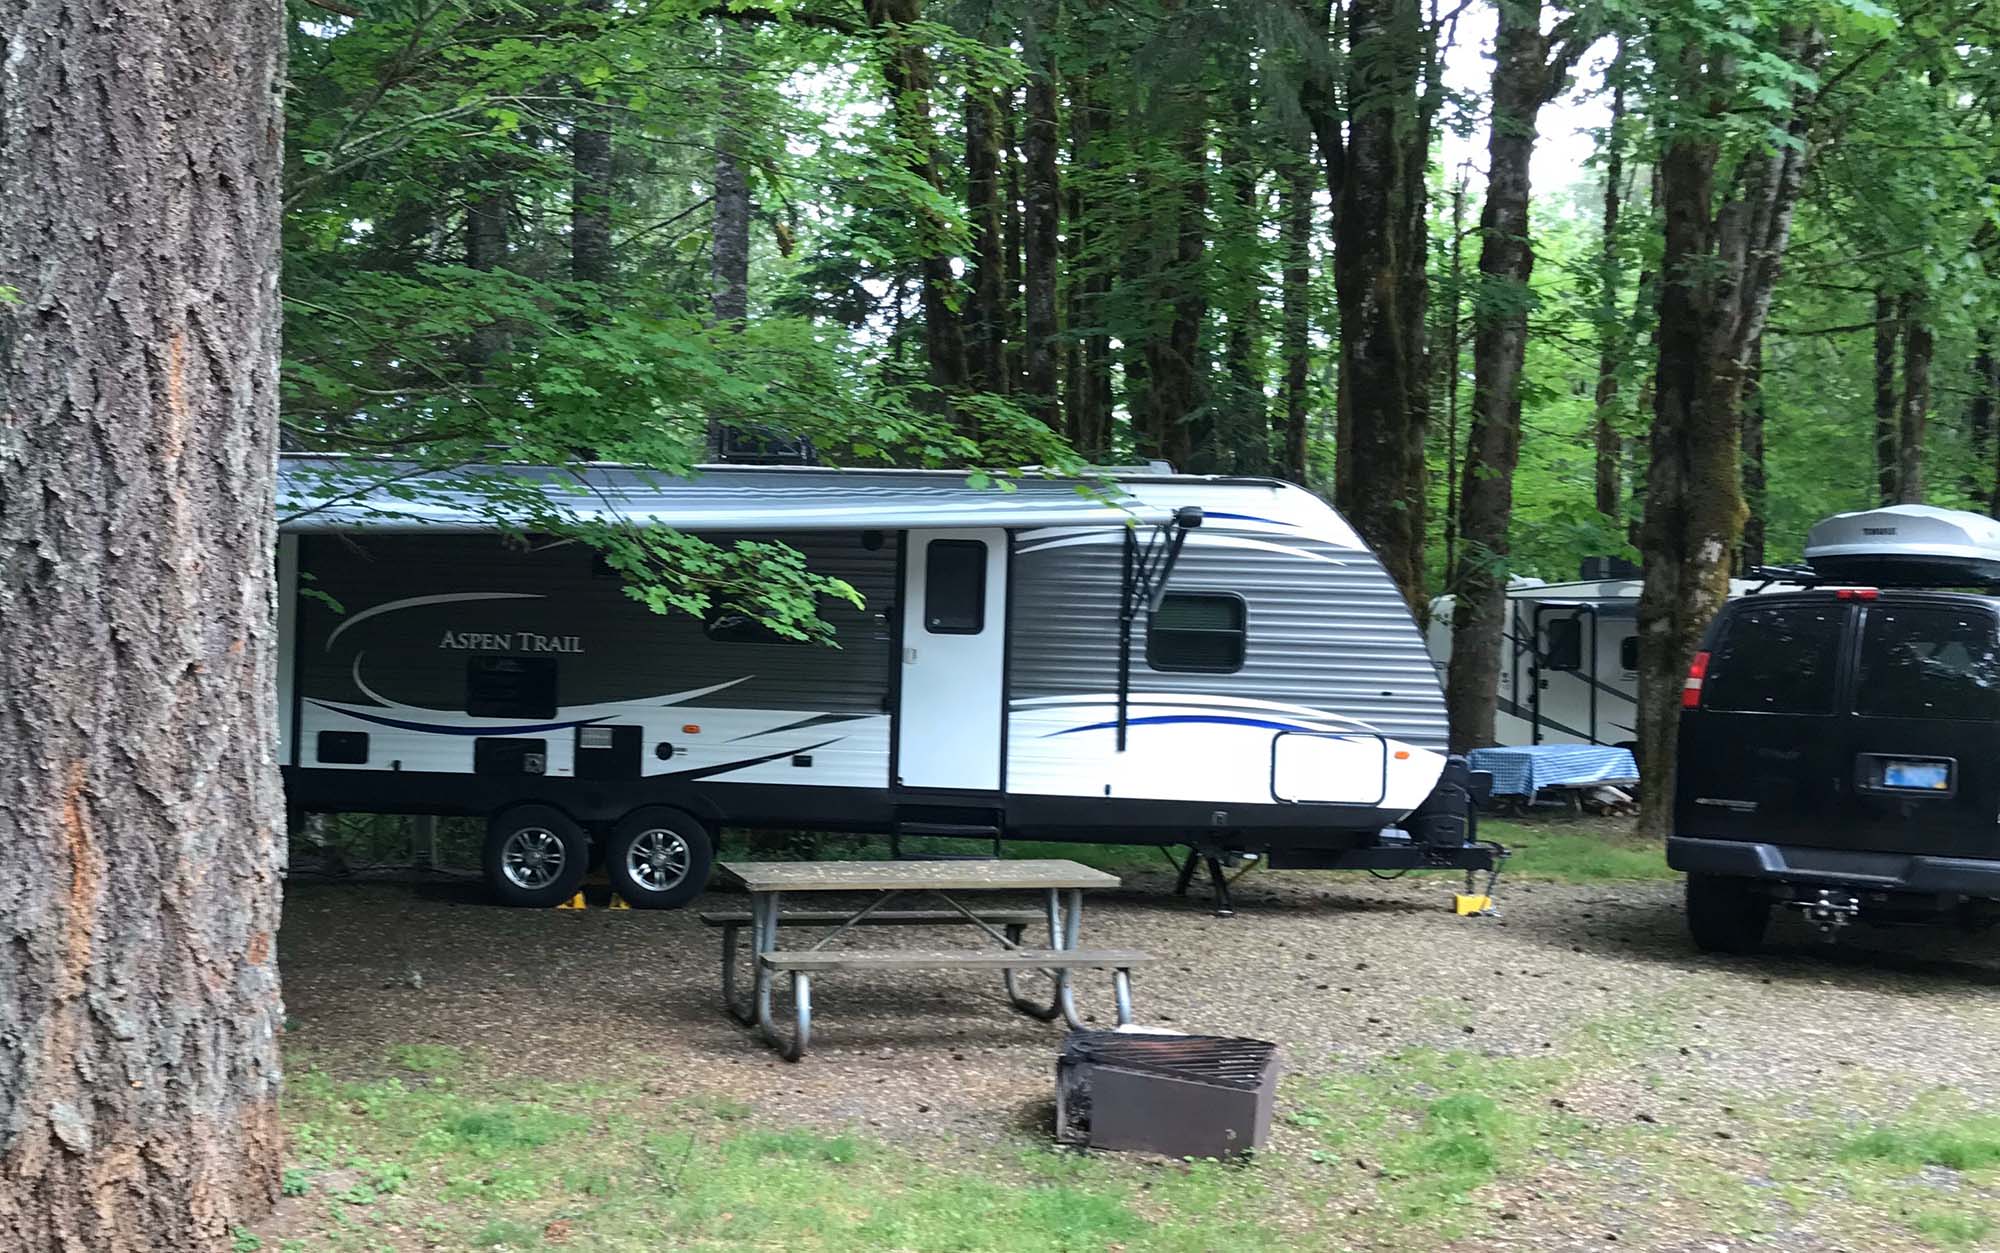 Review - RVshare, a Peer-to-Peer RV Rental Firm